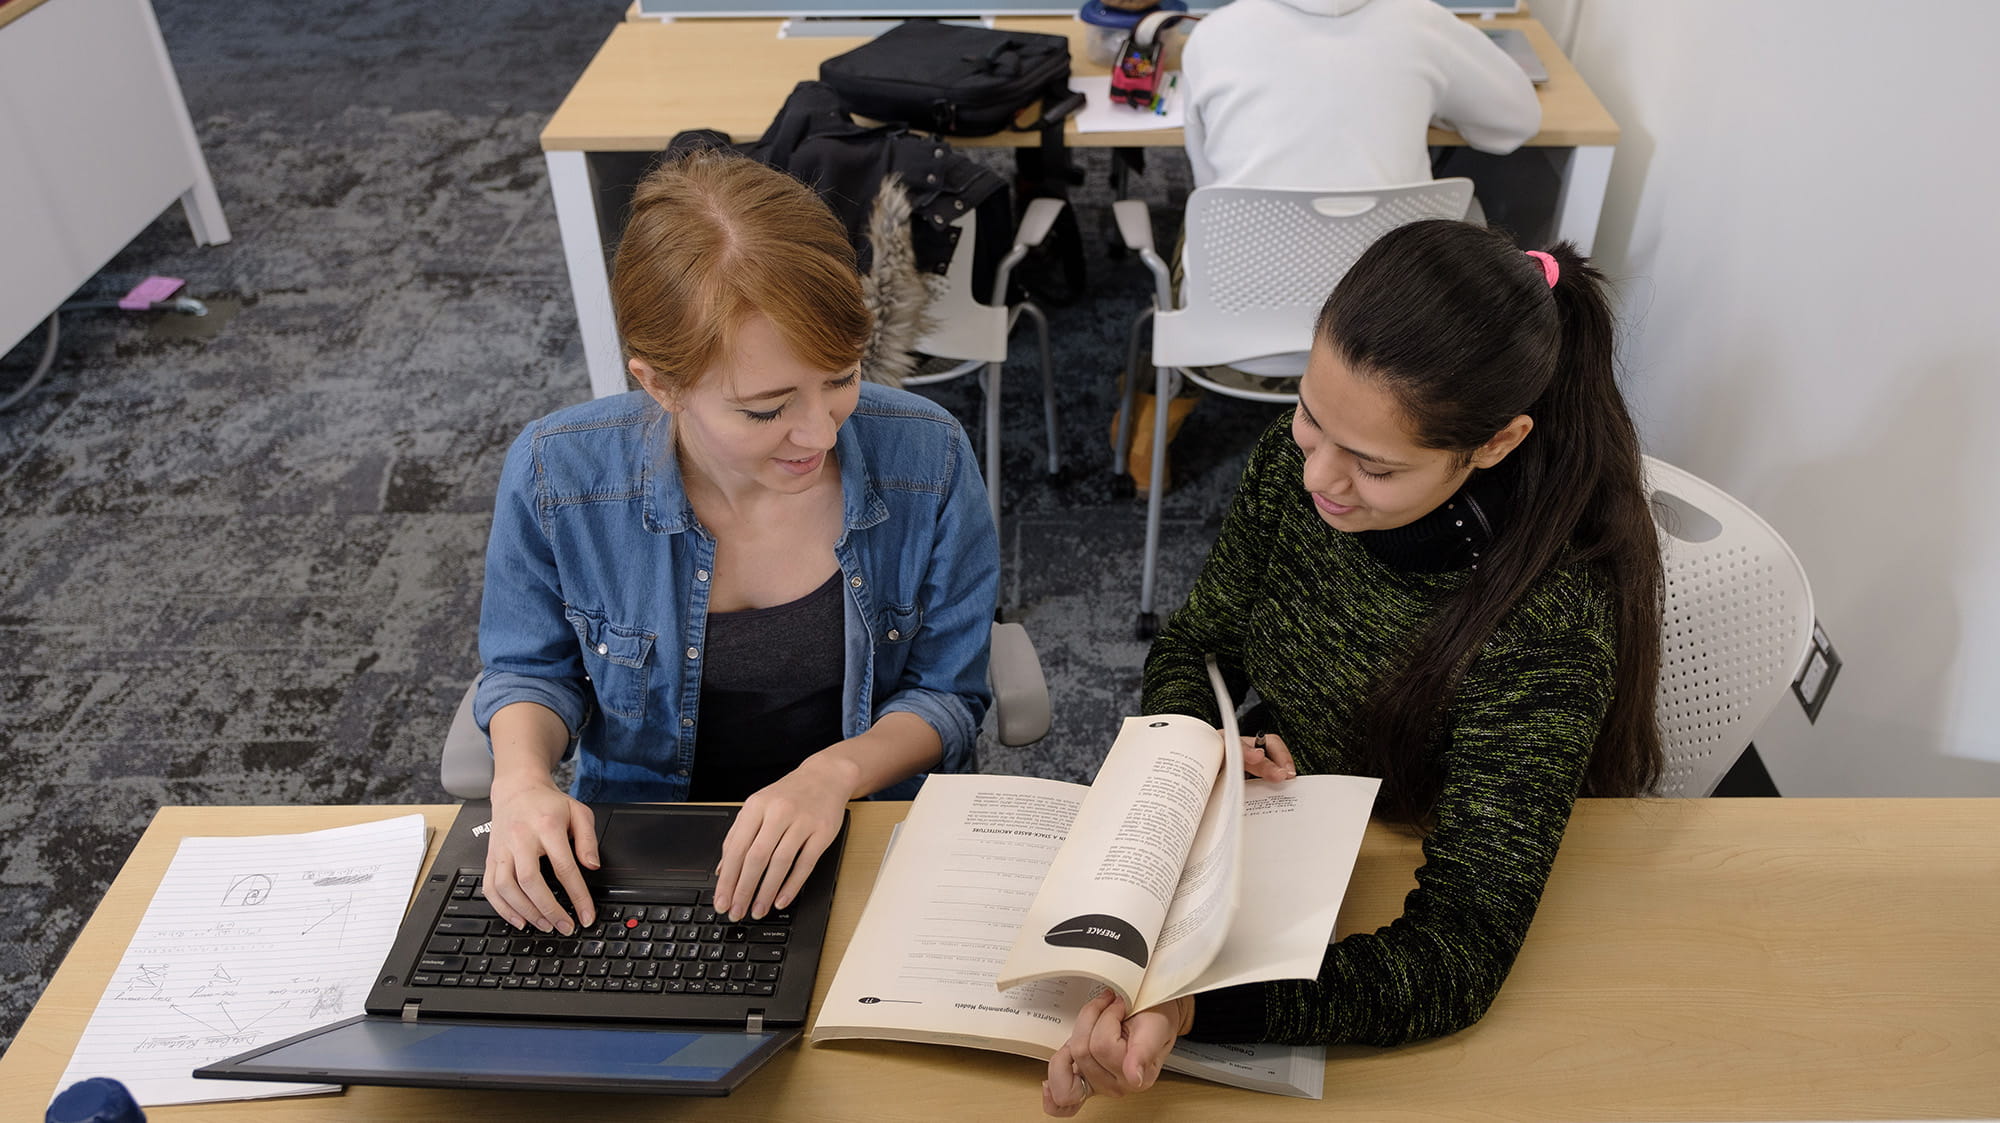 Two students working together on a project at a desk in the library